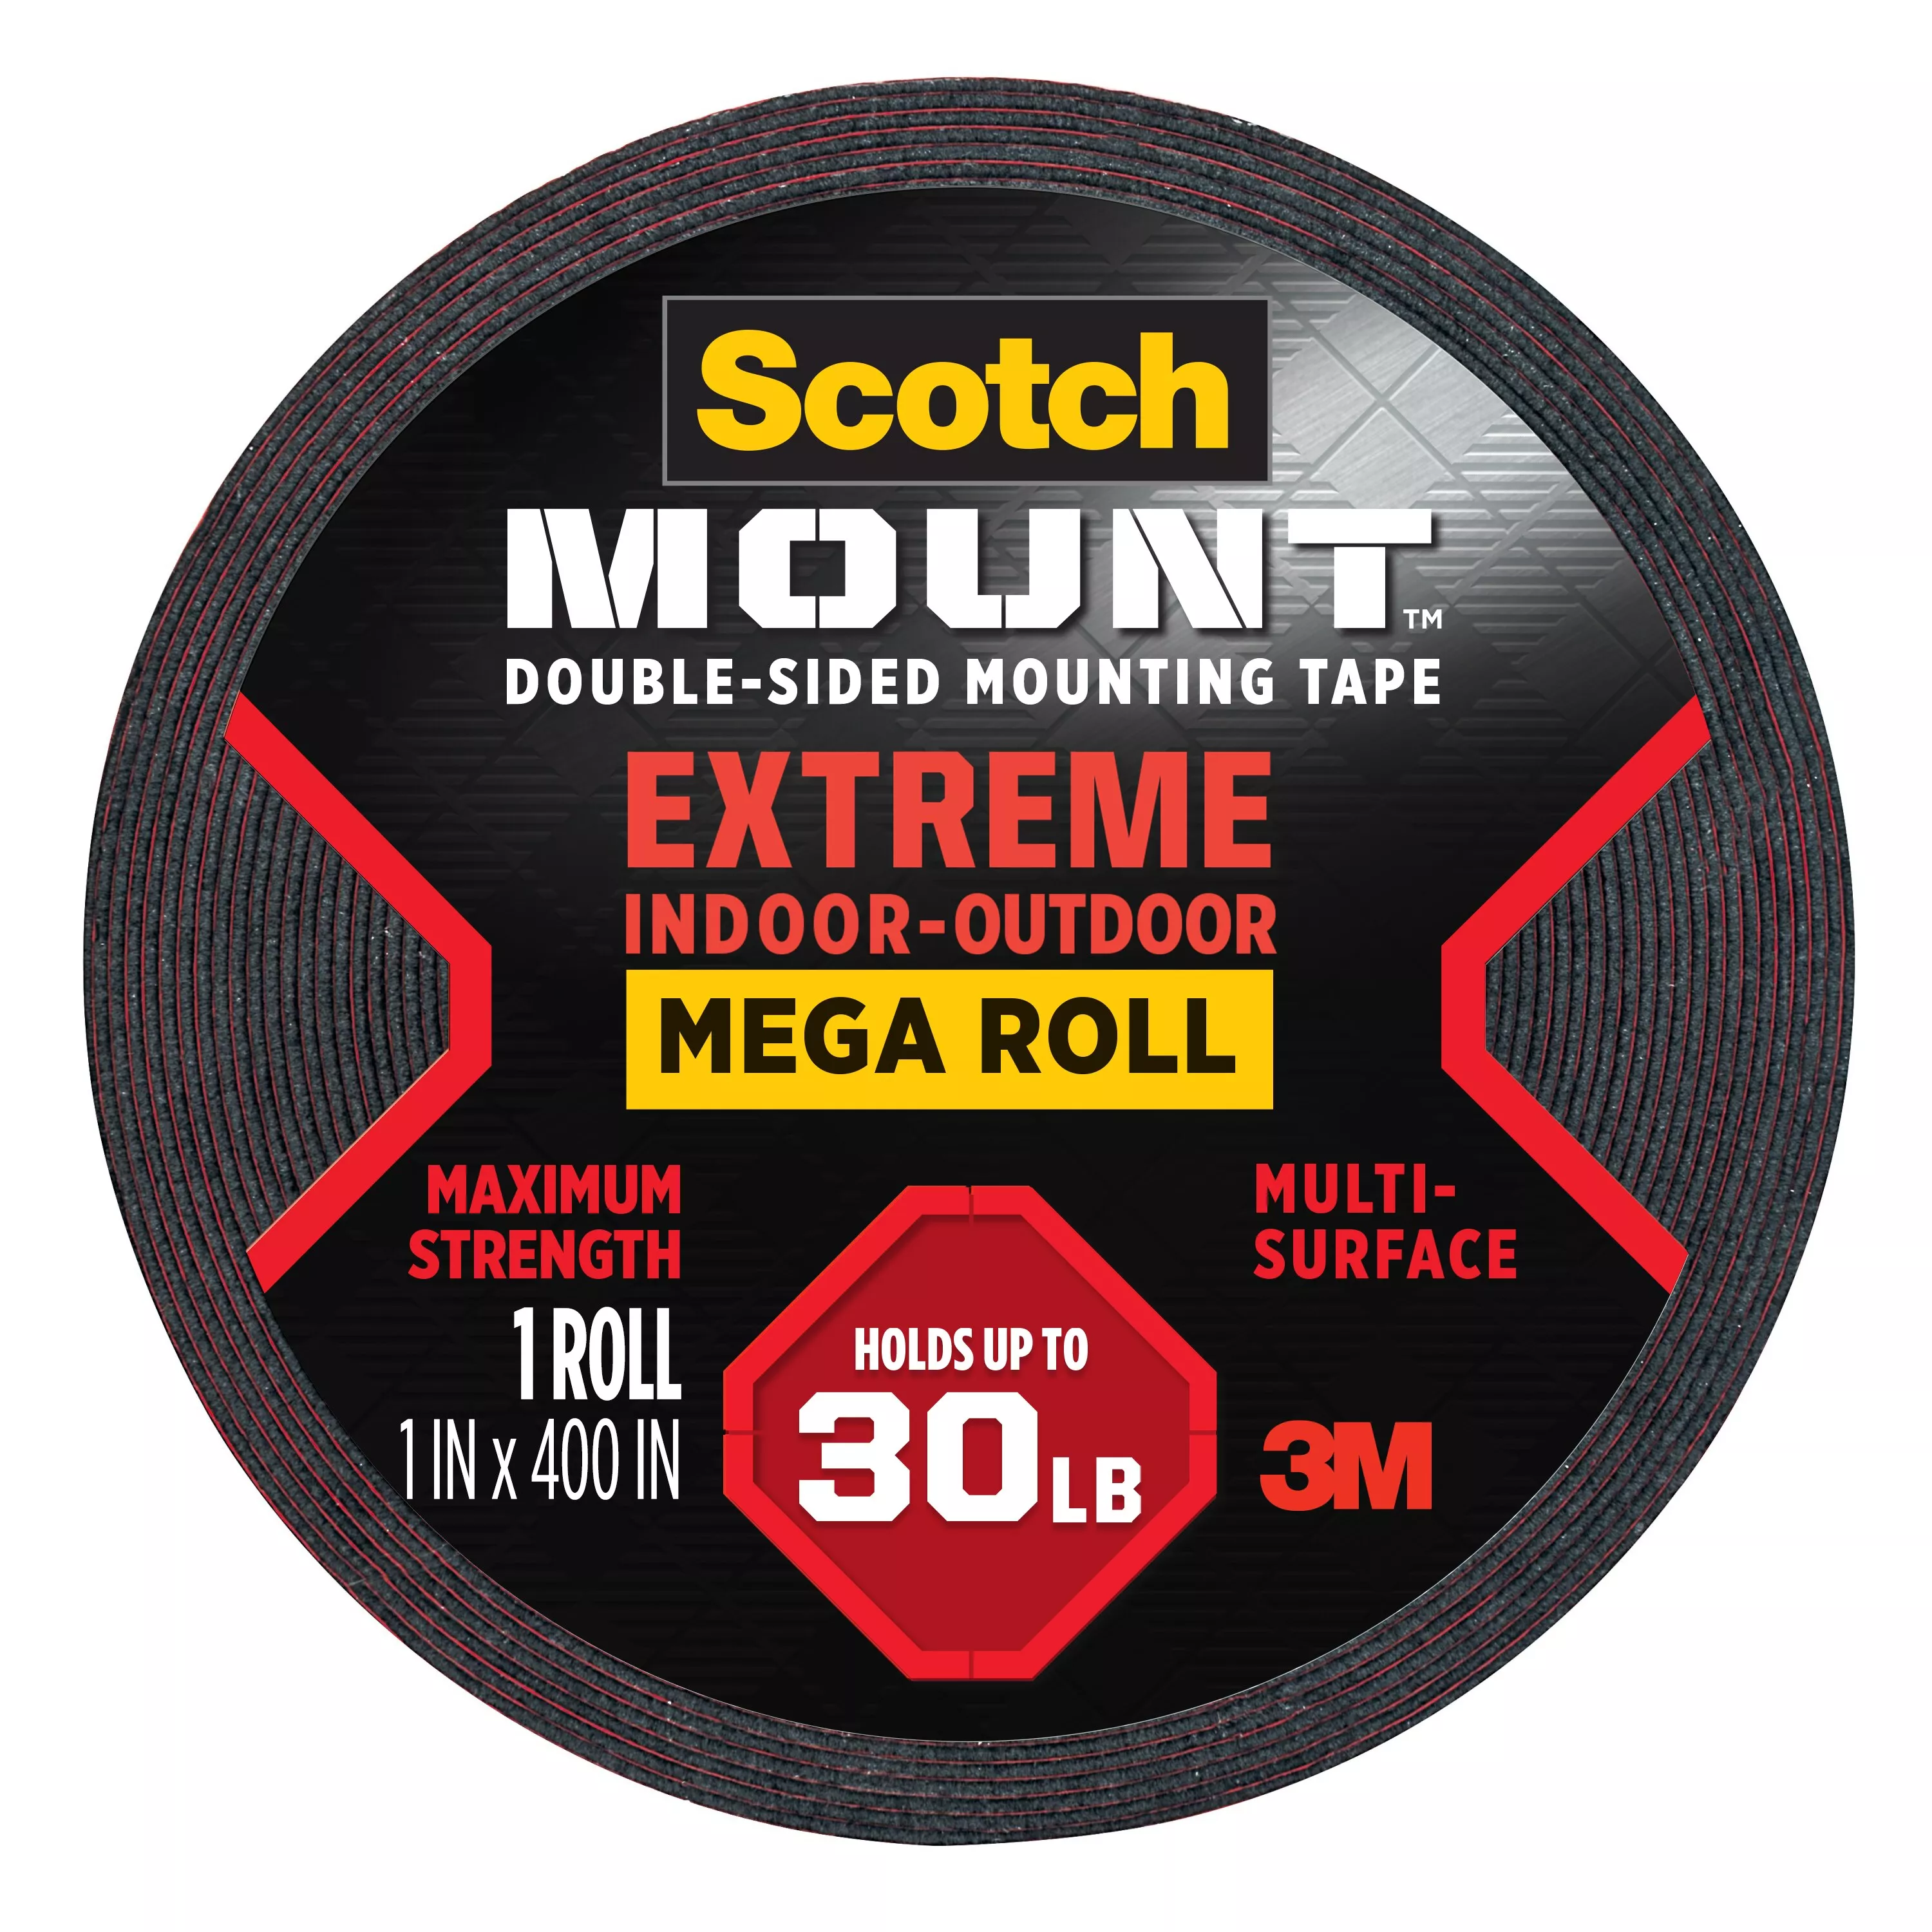 Scotch-Mount™ Extreme Double-Sided Mounting Tape Mega Roll 414H-LONG-DC, 1 In X 400 In (2,54 Cm X 10,1 M)